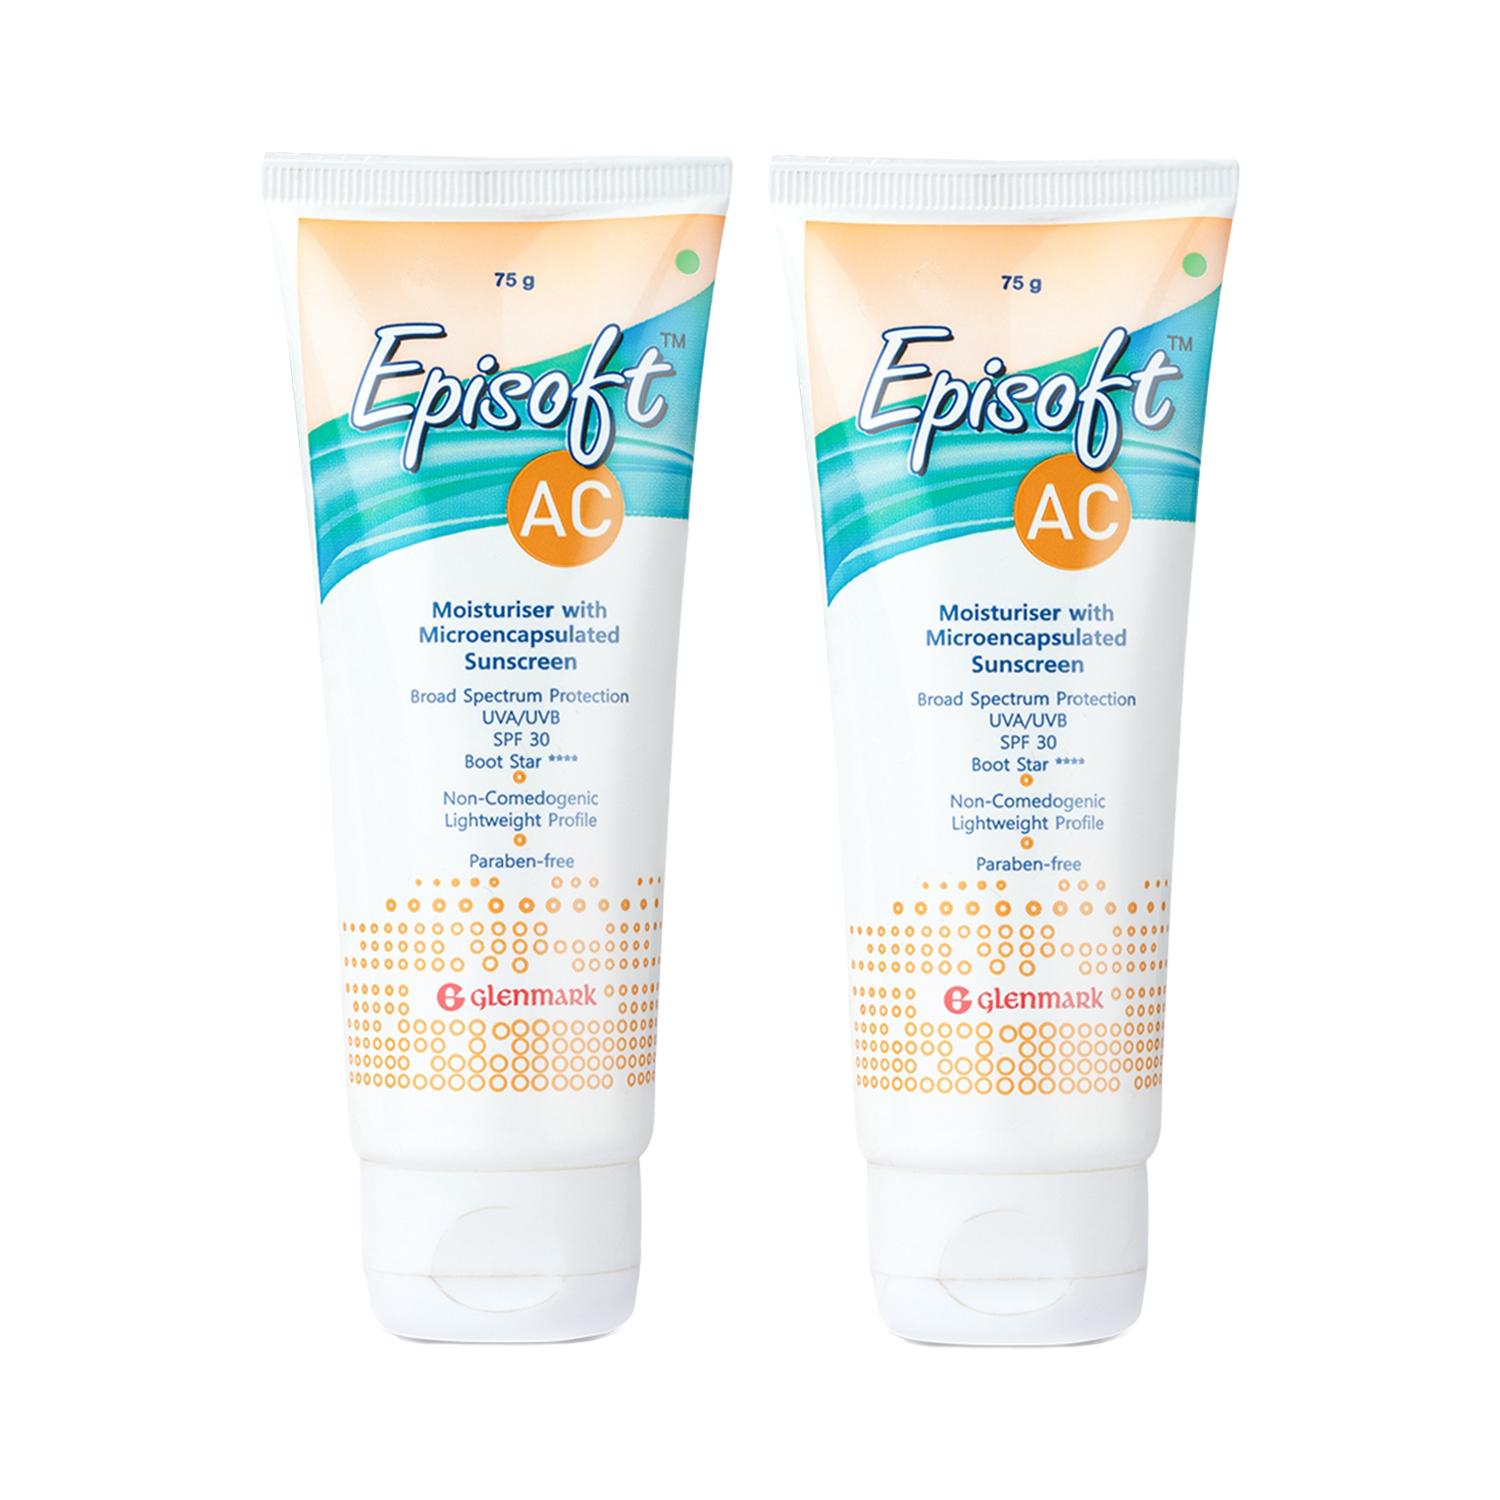 Episoft | Episoft AC Moisturiser SPF 30 With Microencapsulated Sunscreen Pack of 2 (75 g) Combo